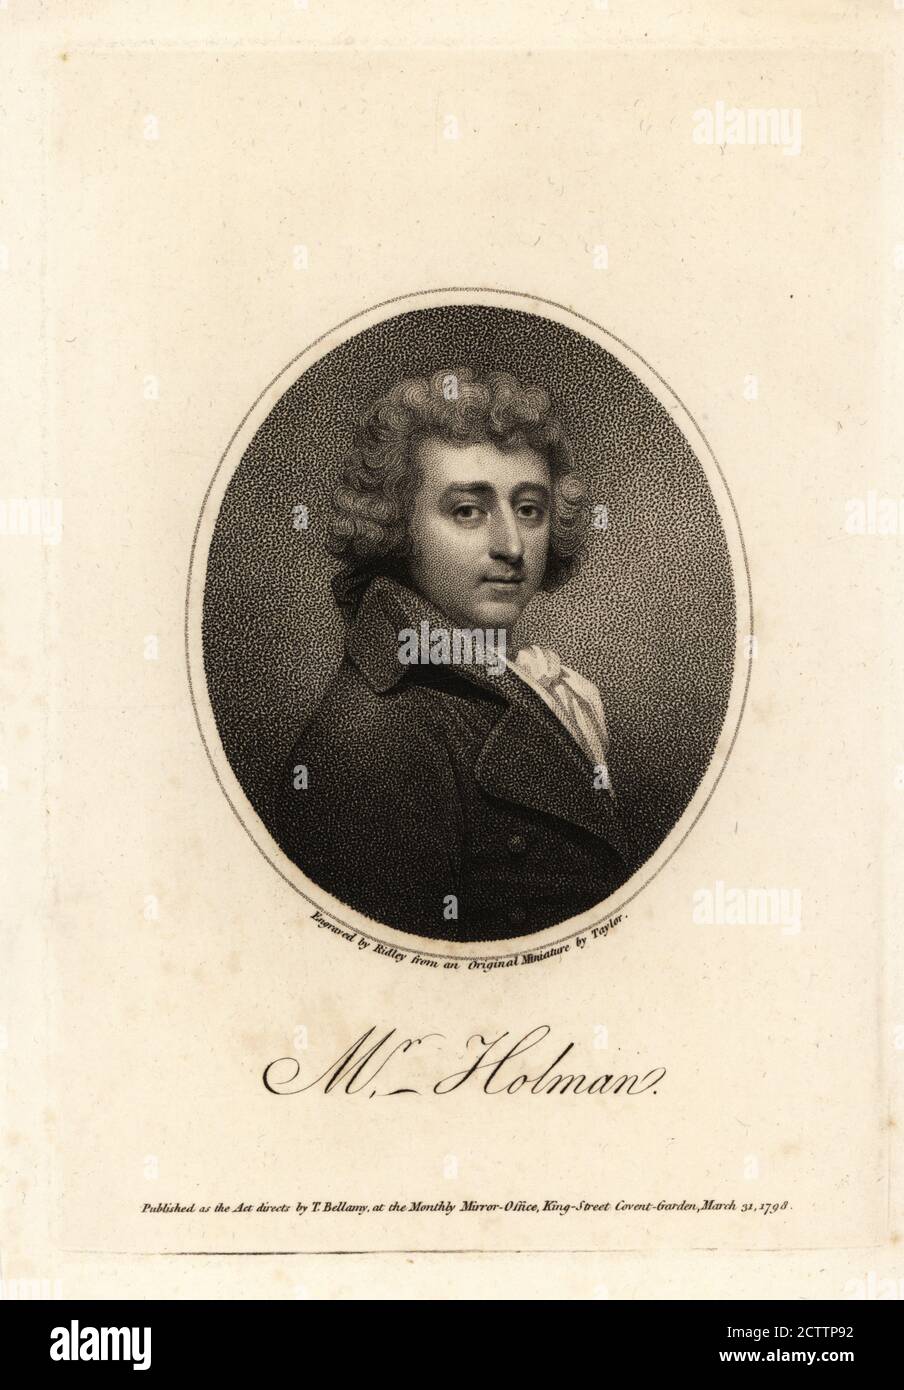 Oval portrait of Joseph George Holman (1764–1817), English actor, dramatist and actor-manager.. Copperplate engraving by William Ridley after a miniature by Taylor (Charles Foot Tayler) from the Monthly Mirror, published by T. Bellamy, King Street, Covent Garden, London, 1798. Stock Photo